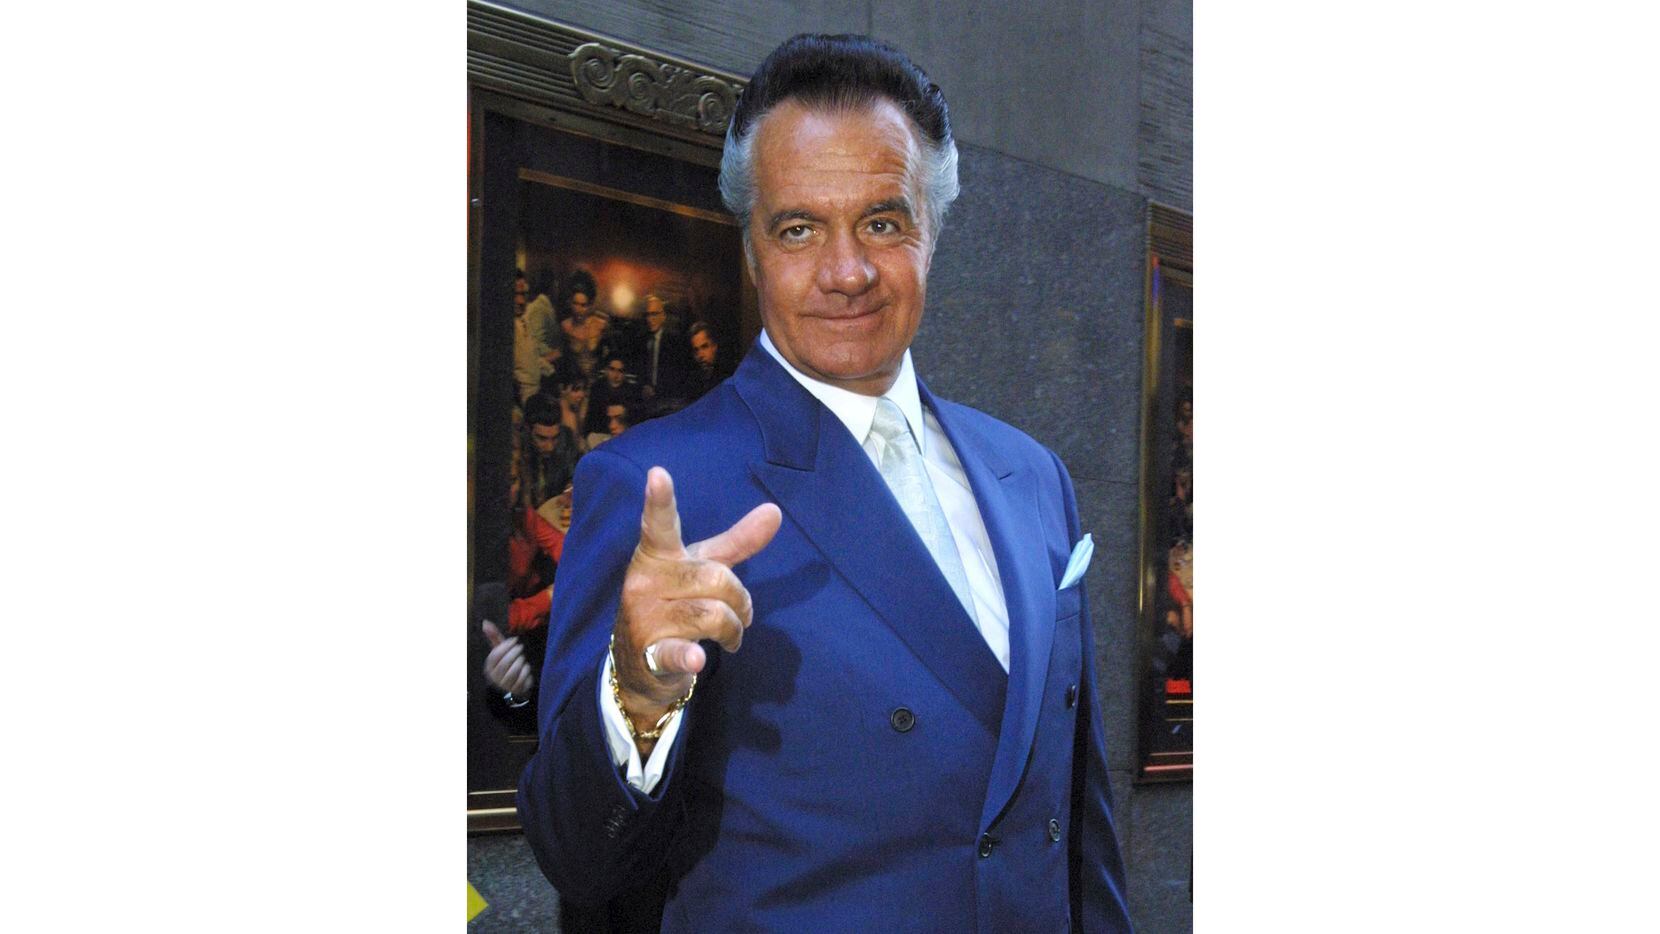 FILE - Tony Sirico who plays Paulie Walnuts on the HBO series "The Sopranos" arrives for the...